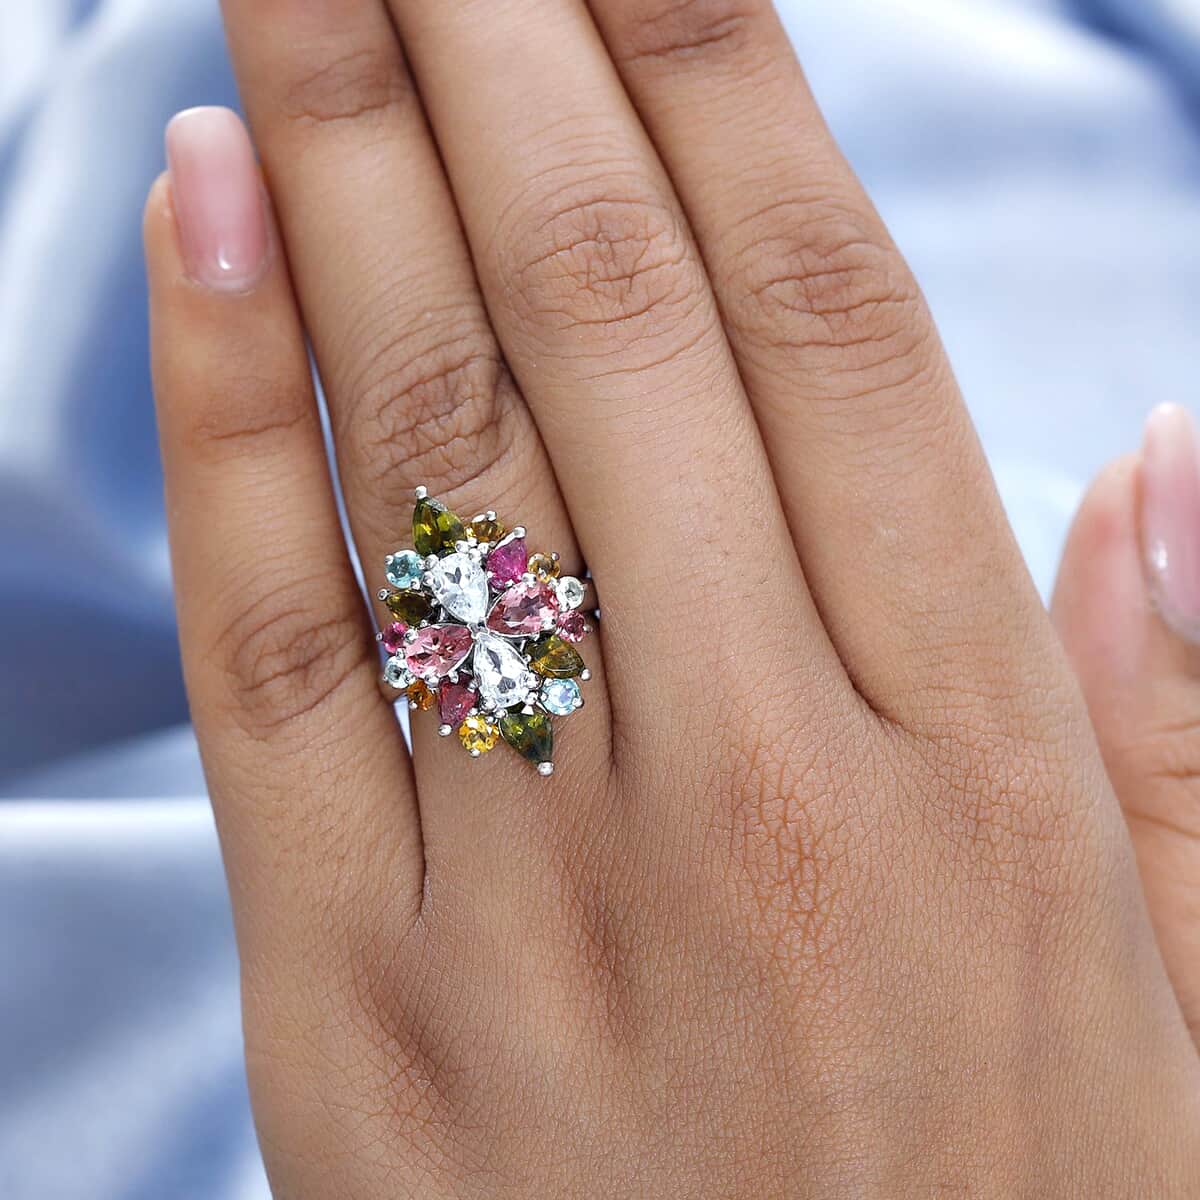 Multi-Tourmaline Elongated Ring, Multi Tourmaline Ring, Colorful Floral Ring, Elongated Floral Ring, Platinum Over Sterling Silver Ring 3.90 ctw (Size 5.0) image number 2